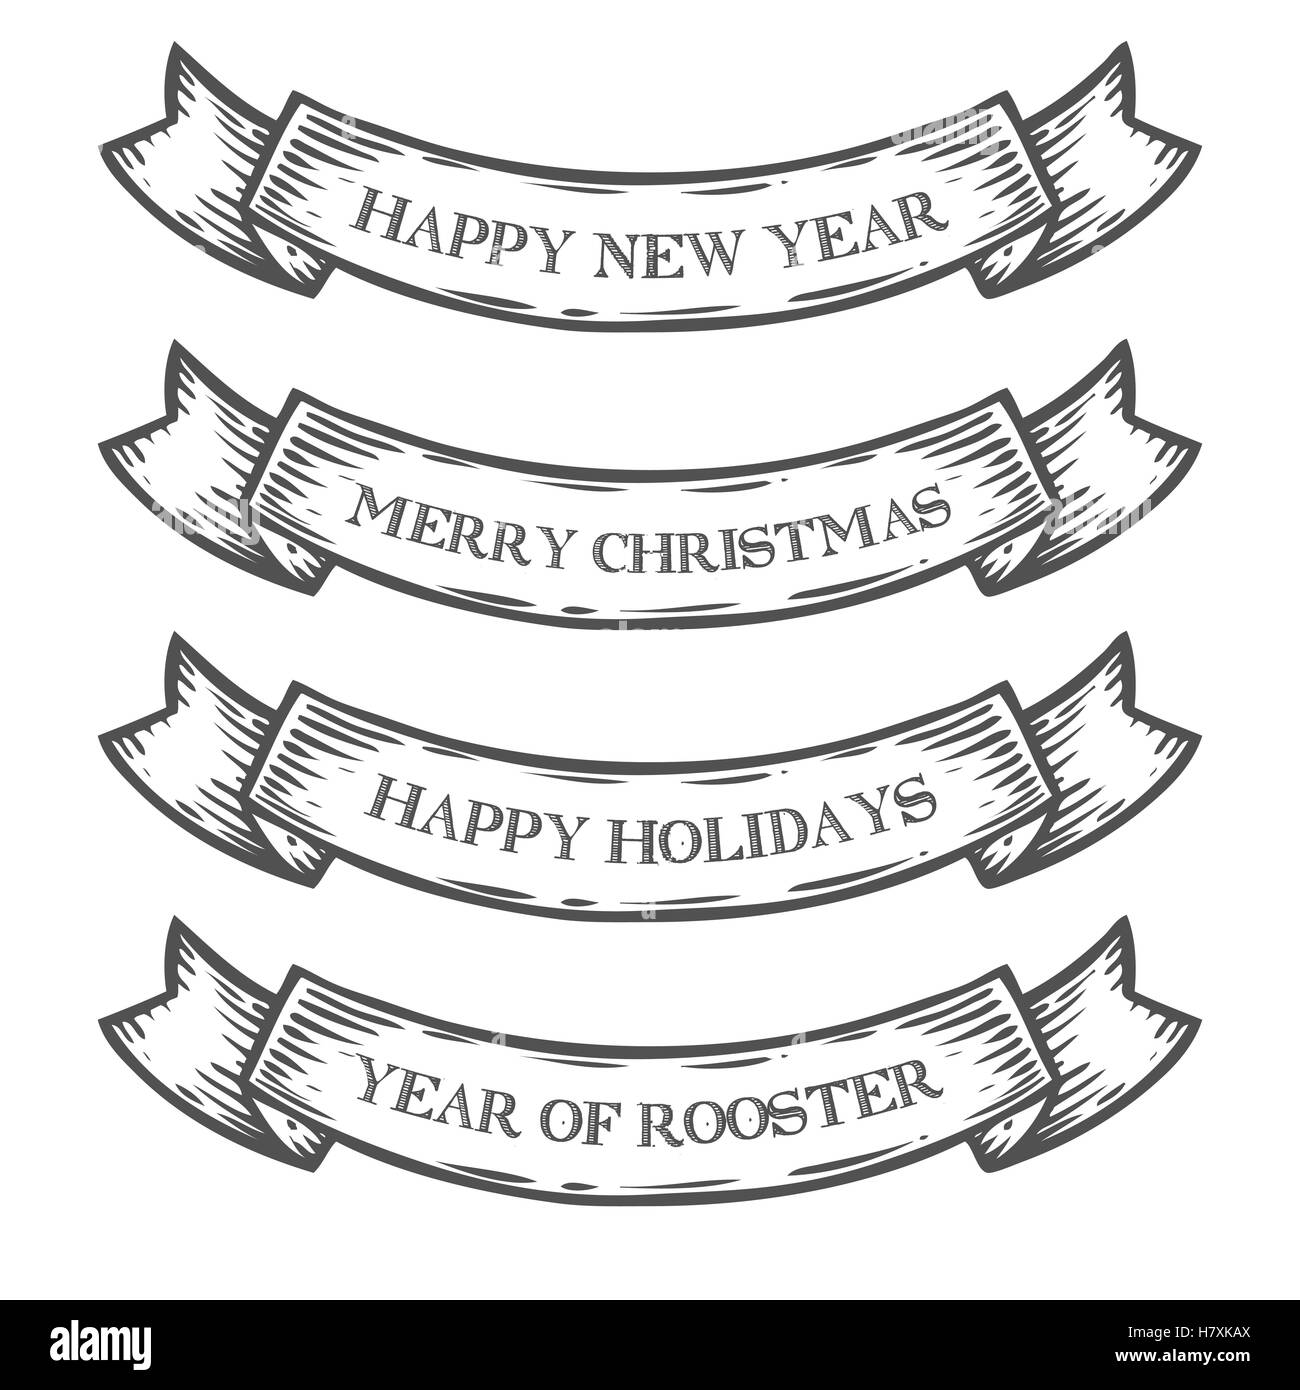 New Year 2017, Merry Christmas, Happy holidays, Year of Rooster emblem ribbon. Monochrome medieval set vintage engraving sign is Stock Vector